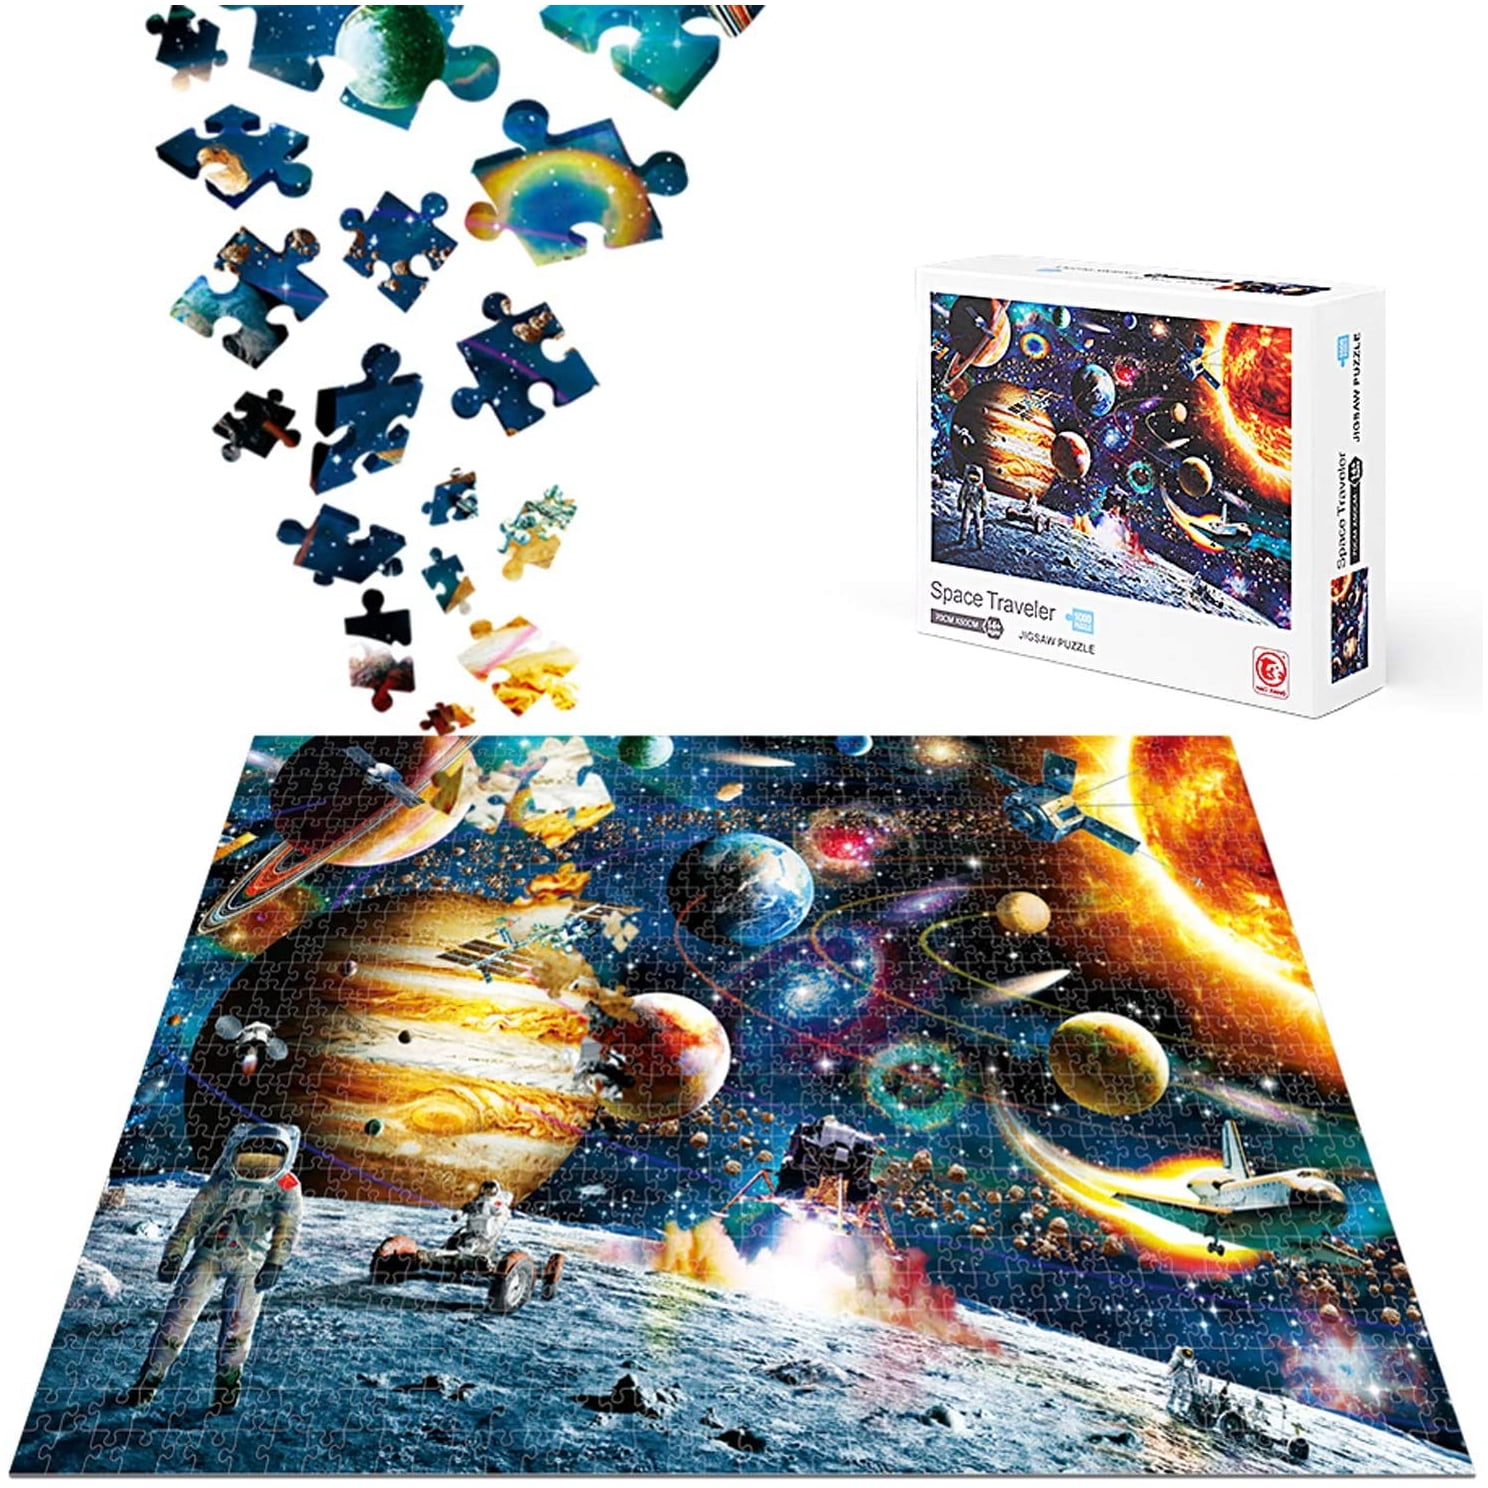 New Puzzle Jigsaw Piece Pieces 1000 Edition for Kids Adult Puzzles Educational 